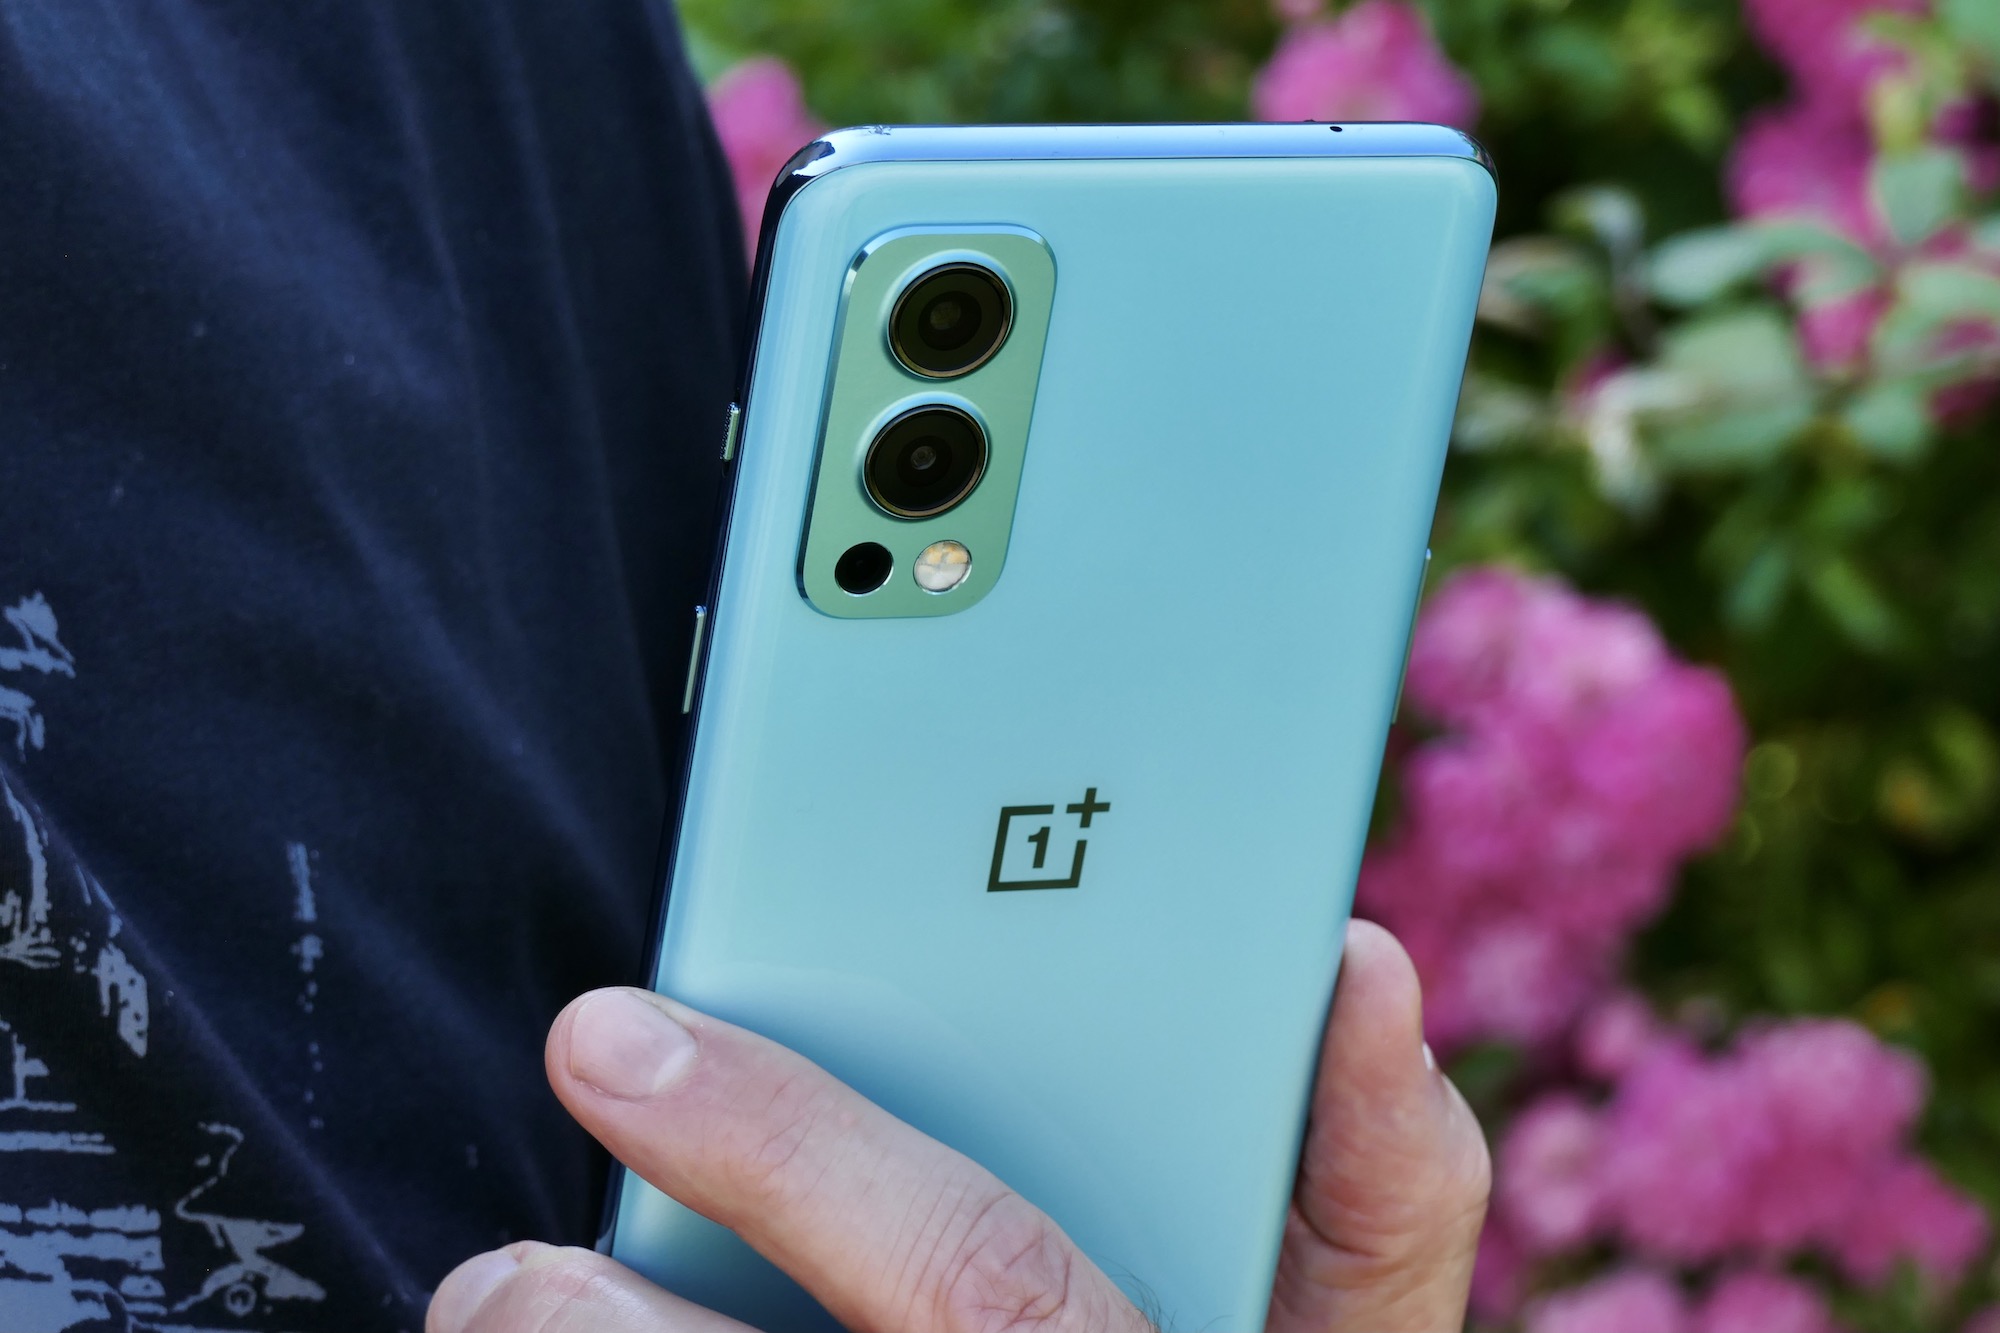 OnePlus Nord 2 5G review: Design, build quality, handling